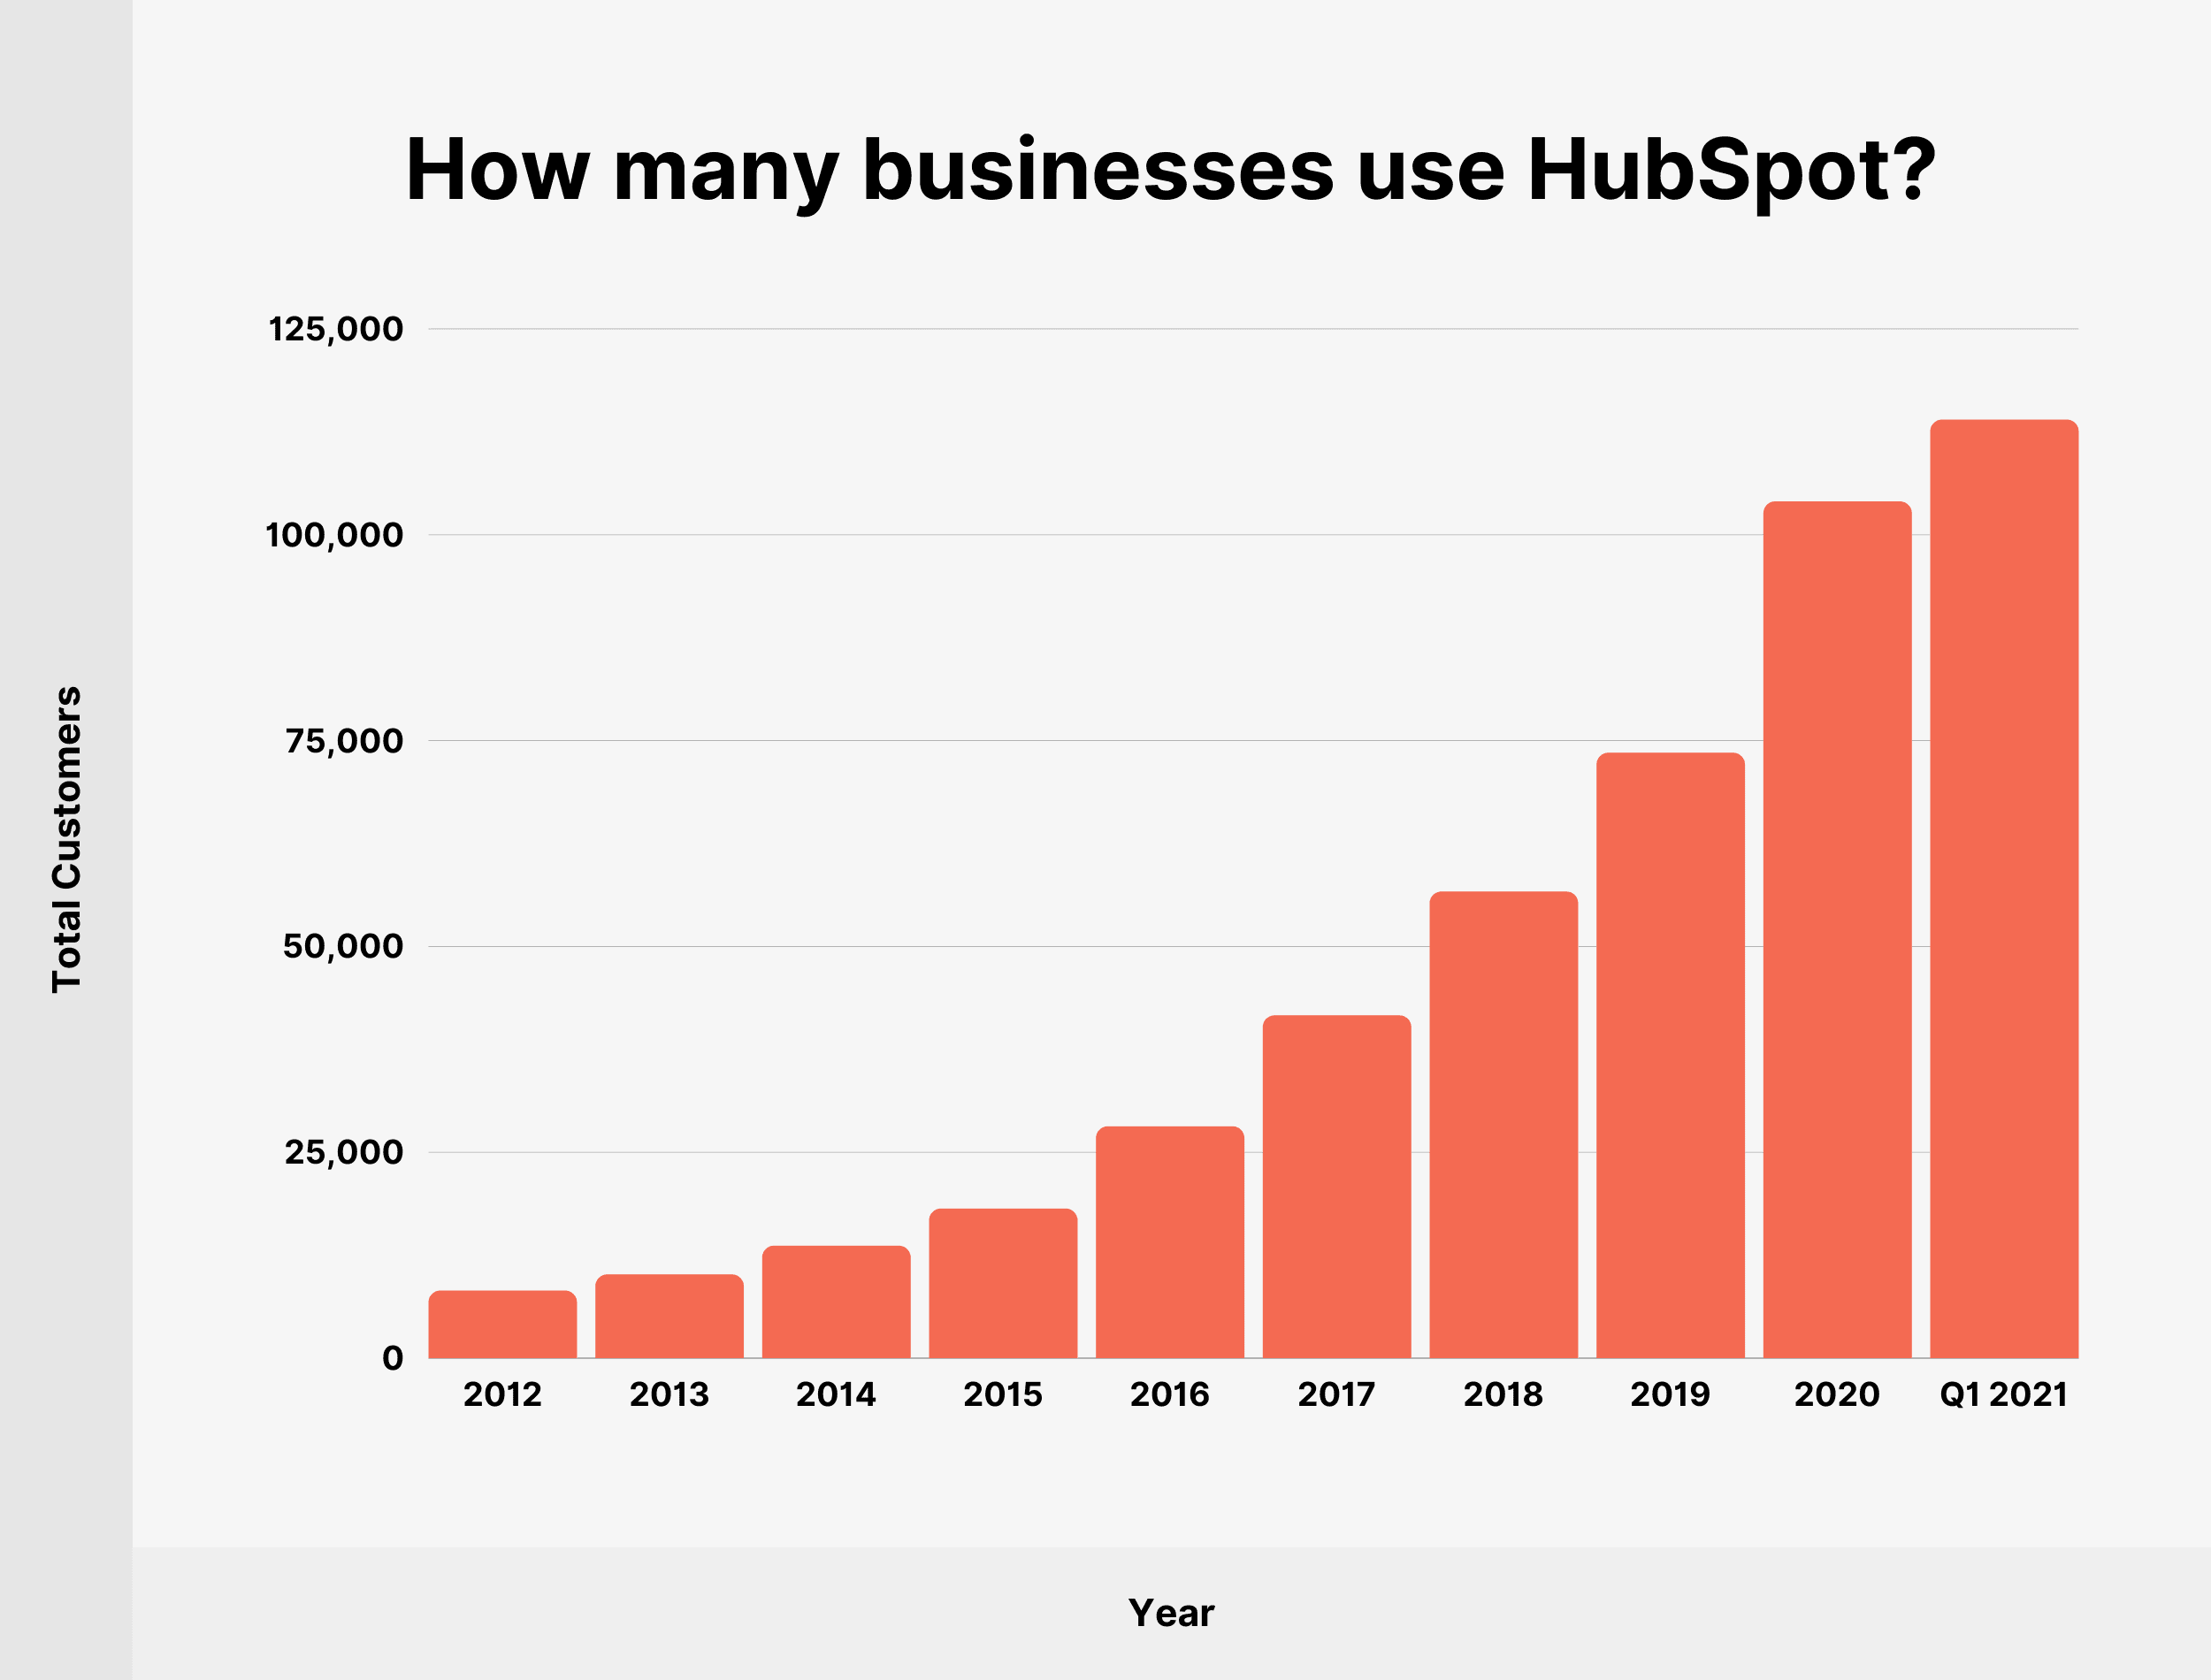 How many businesses use HubSpot?